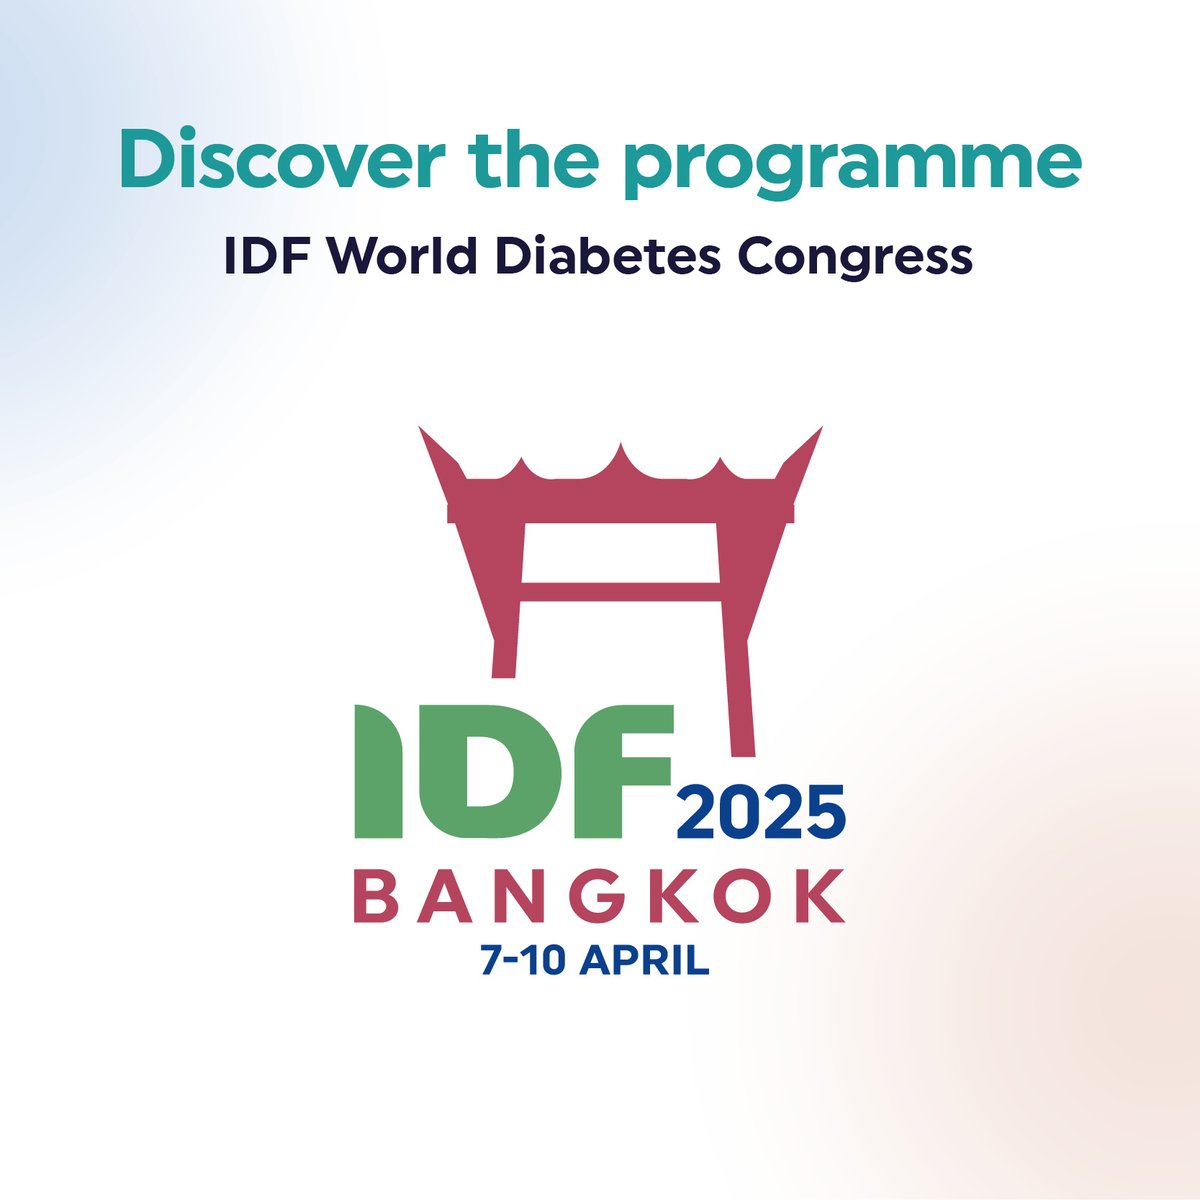 #IDF2025 - Chaired by Professor Antonio Ceriello, our next congress in Bangkok in April 2025 will delve into multiple topics including technology and AI. Discover the 10 programme streams & the experts leading them: idf2025.org/programme/comm…